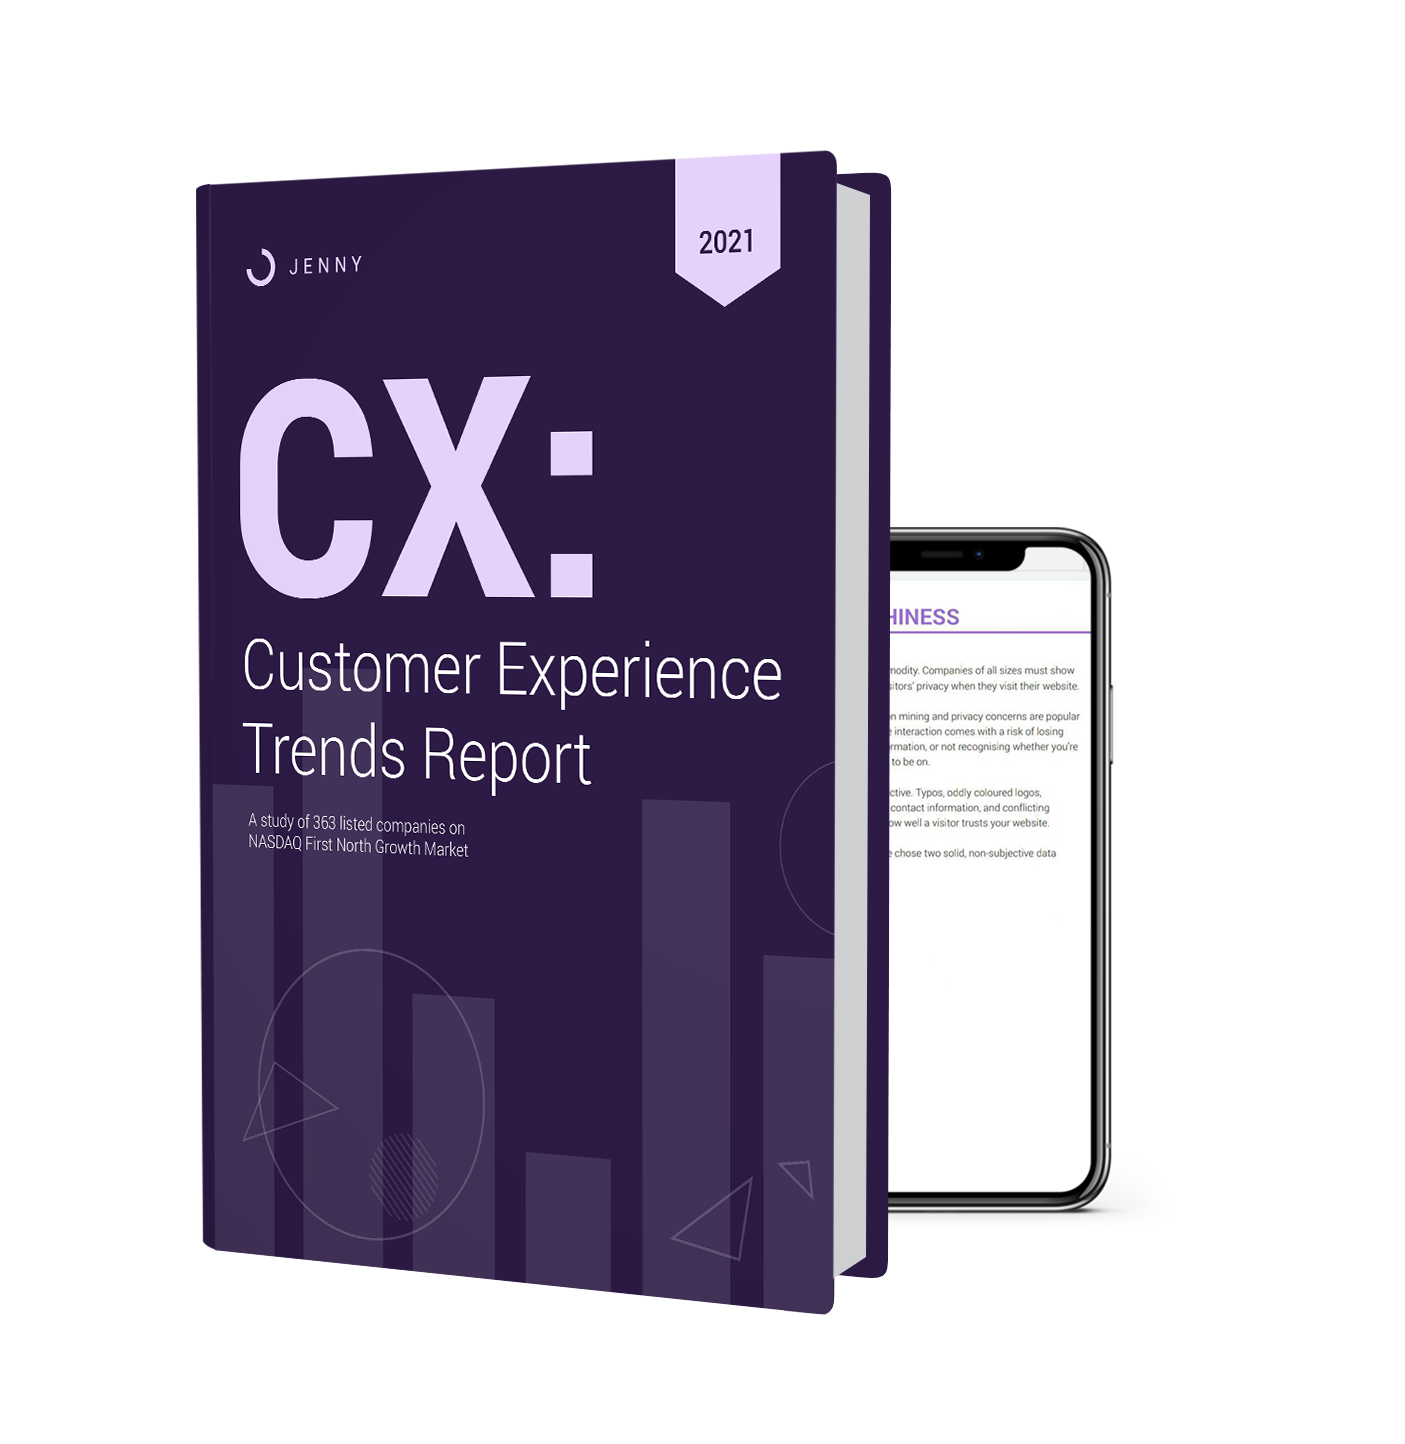 Customer Experience Trends Report for 2021 by GetJenny